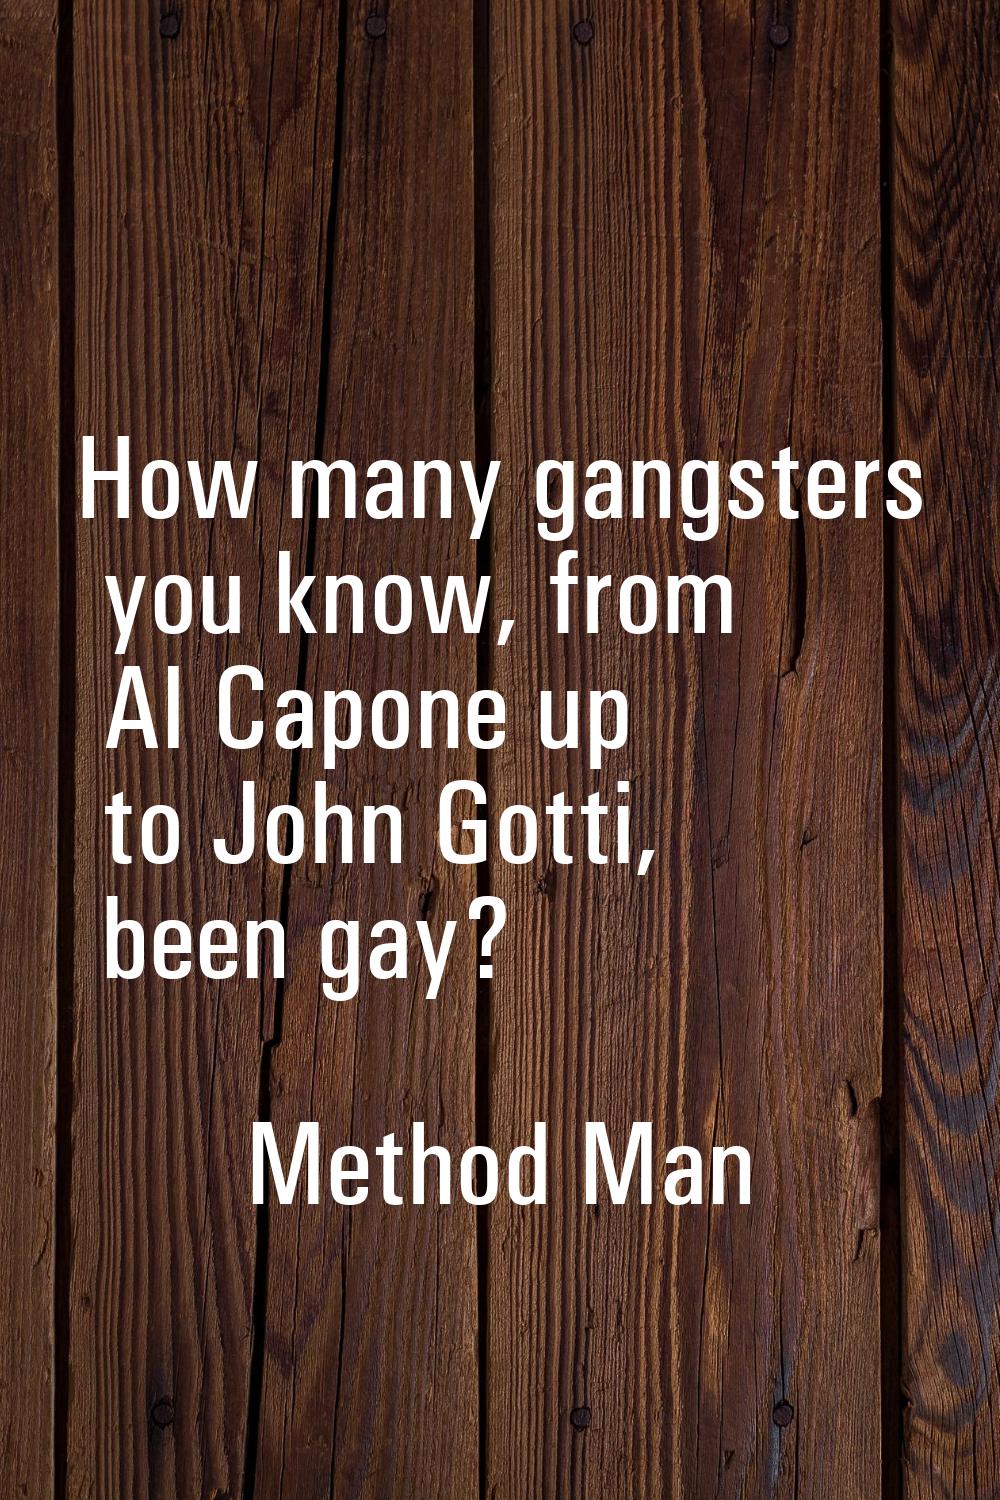 How many gangsters you know, from Al Capone up to John Gotti, been gay?